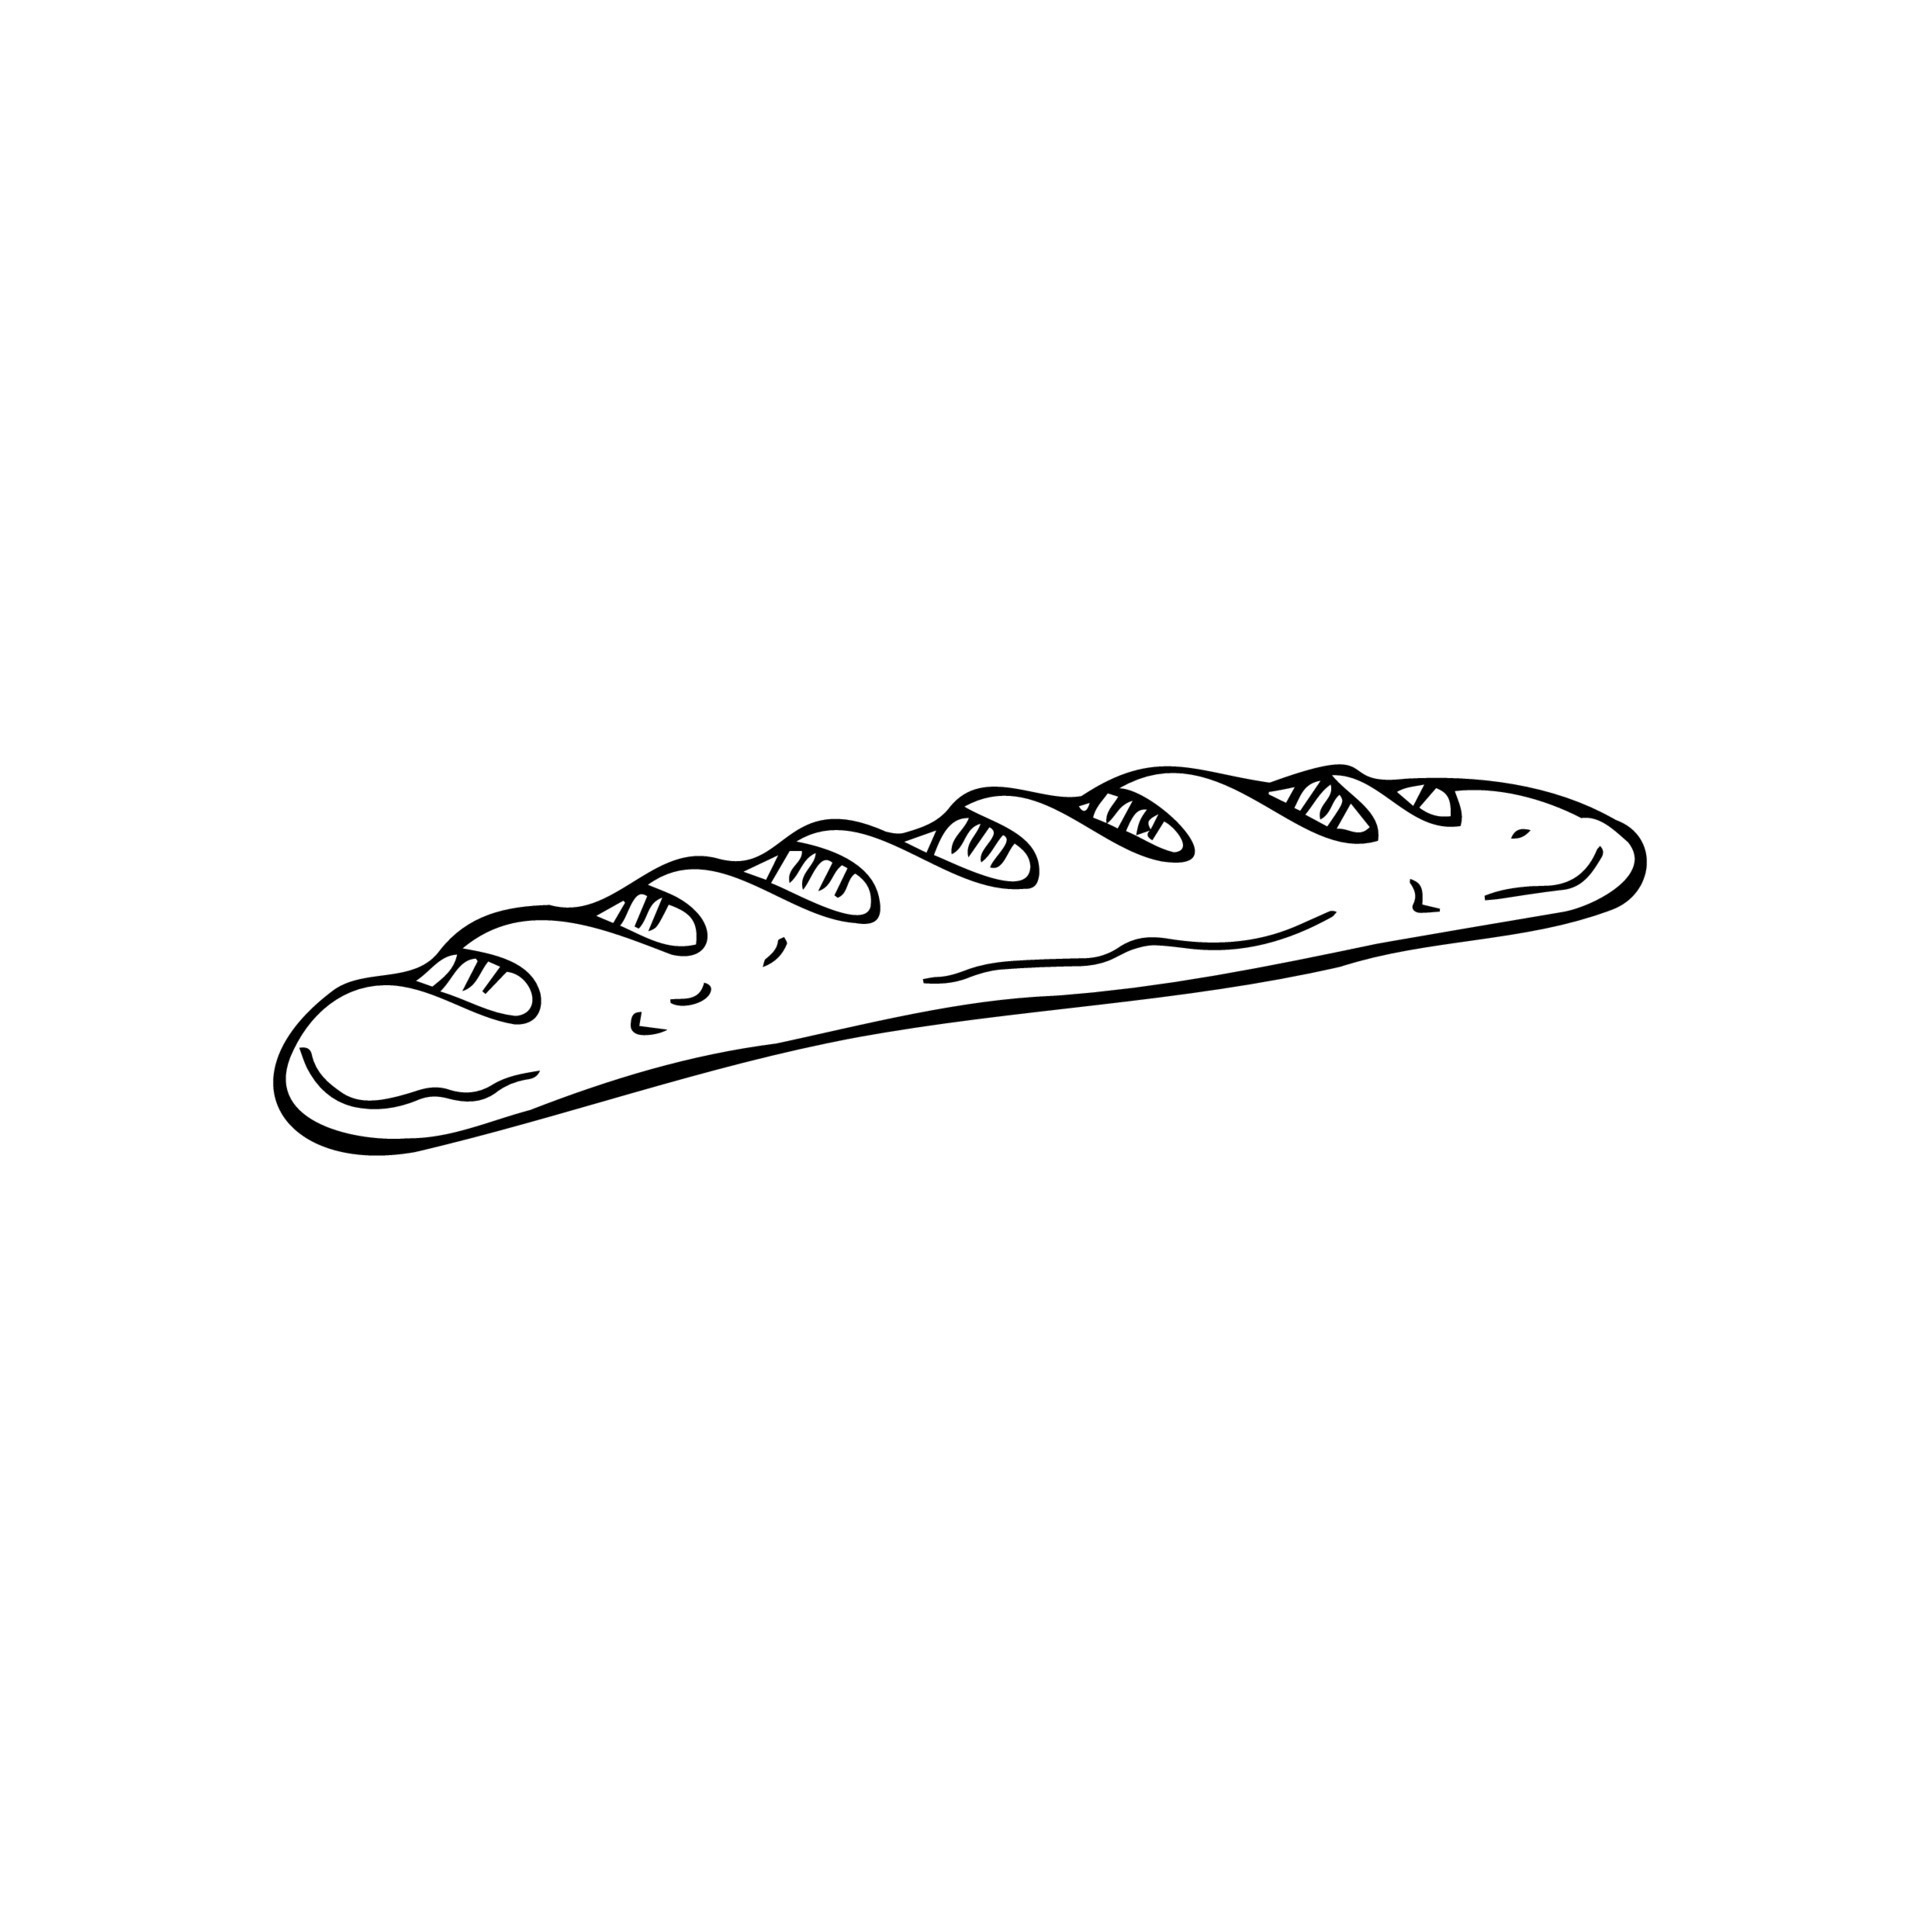 Loaf of bread french baguette thin black lines on white background ...